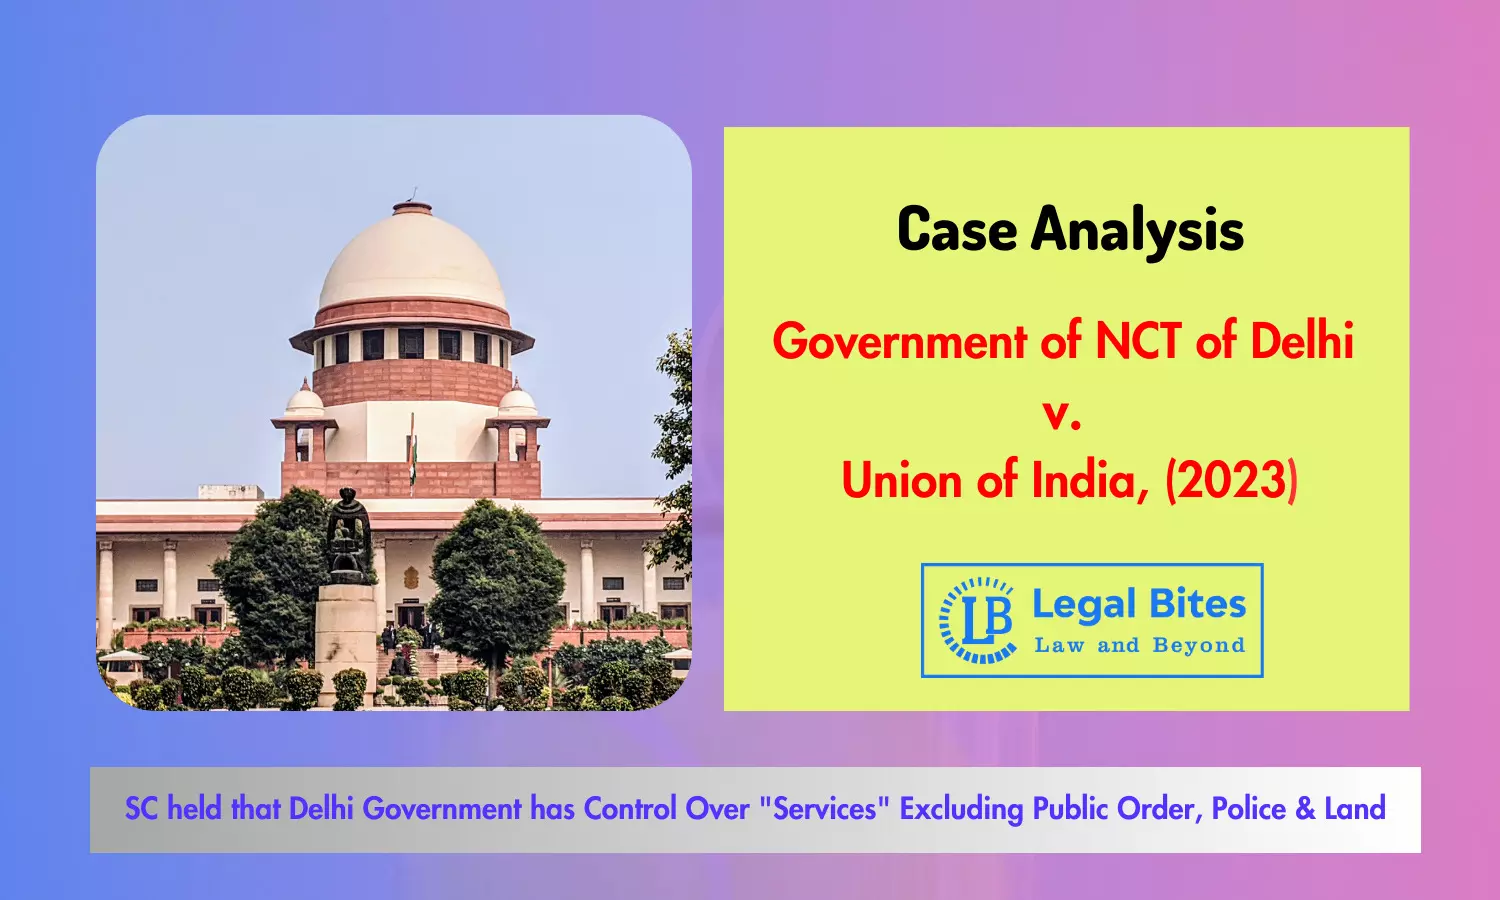 Case Analysis: Government of NCT of Delhi v. Union of India (2023) | Delhi Government has Control Over Services Excluding Public Order, Police & Land